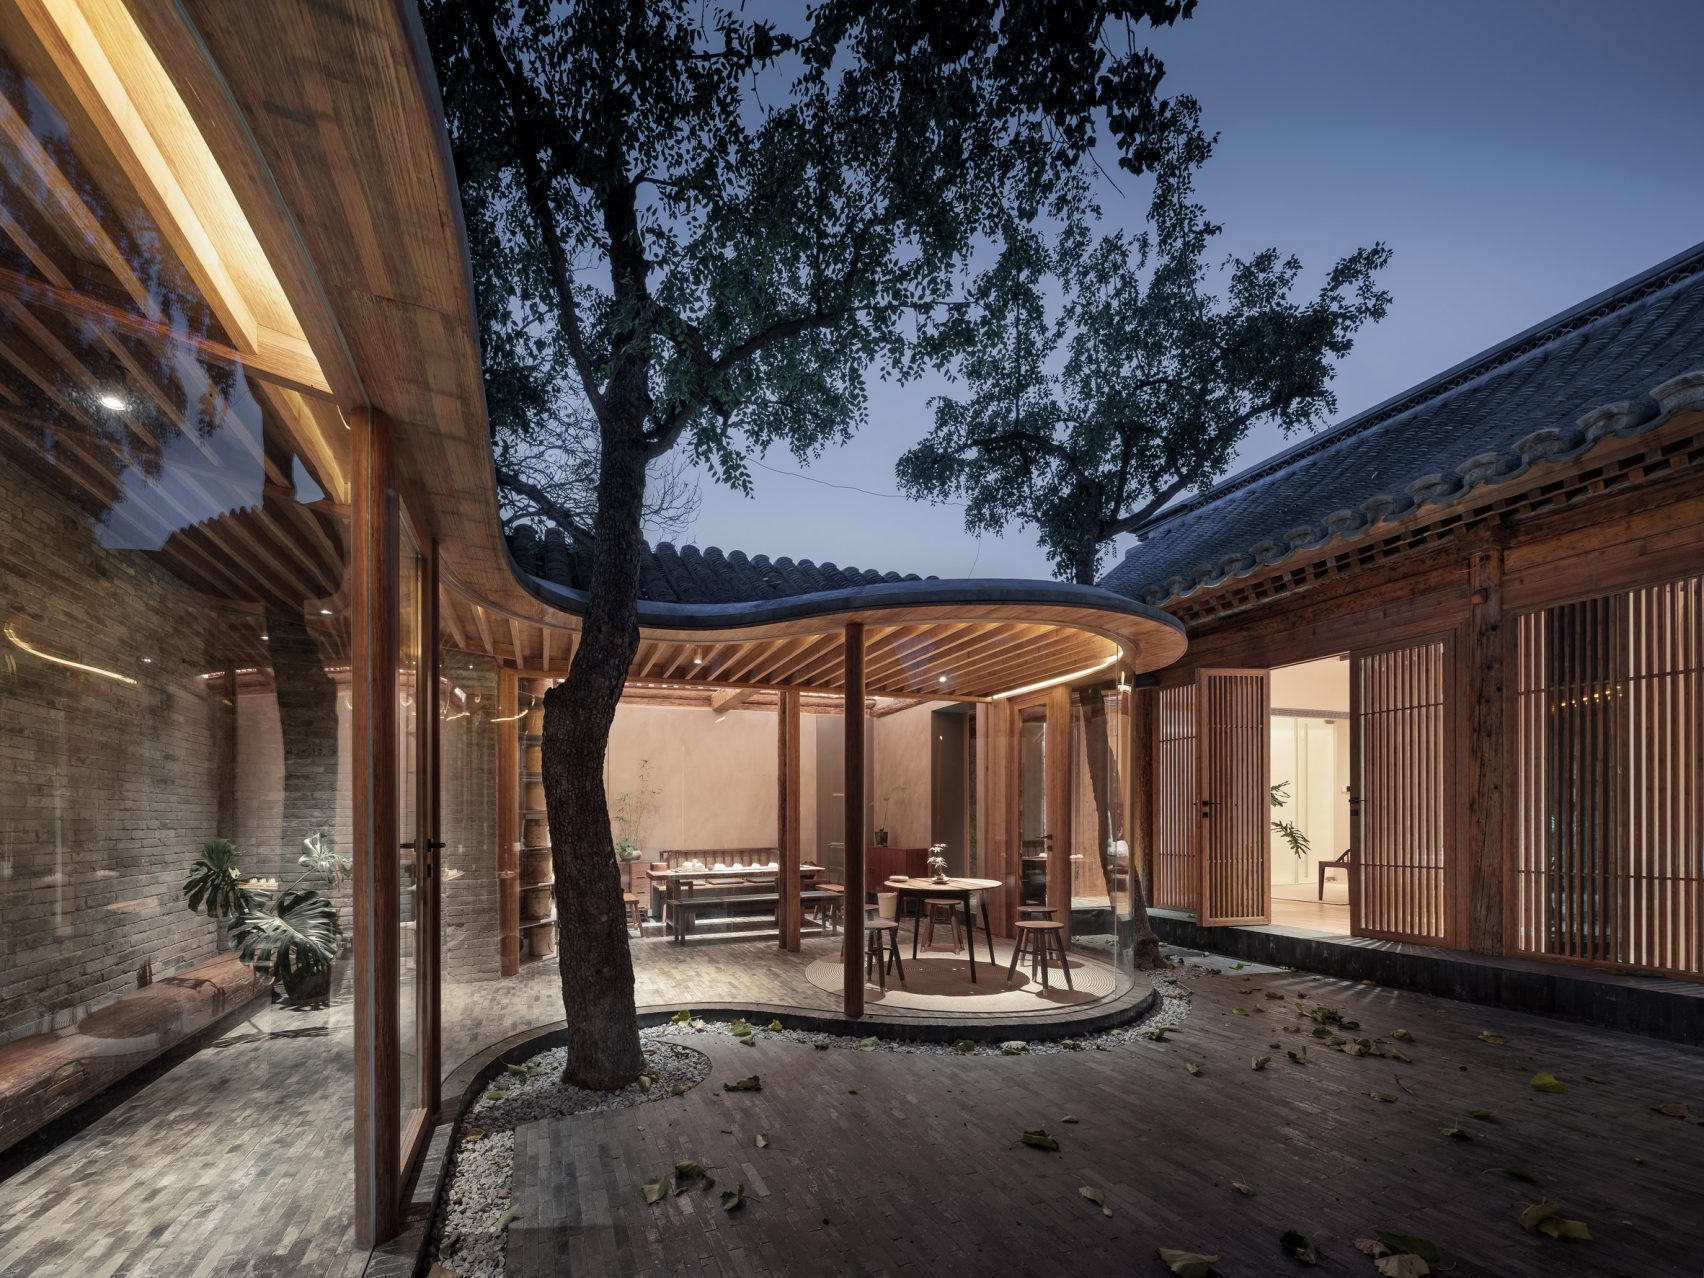 The Qishe Courtyard in Beijing by ARCHSTUDIO blurs the lines between inside and outside. Image by Wu Qingshan